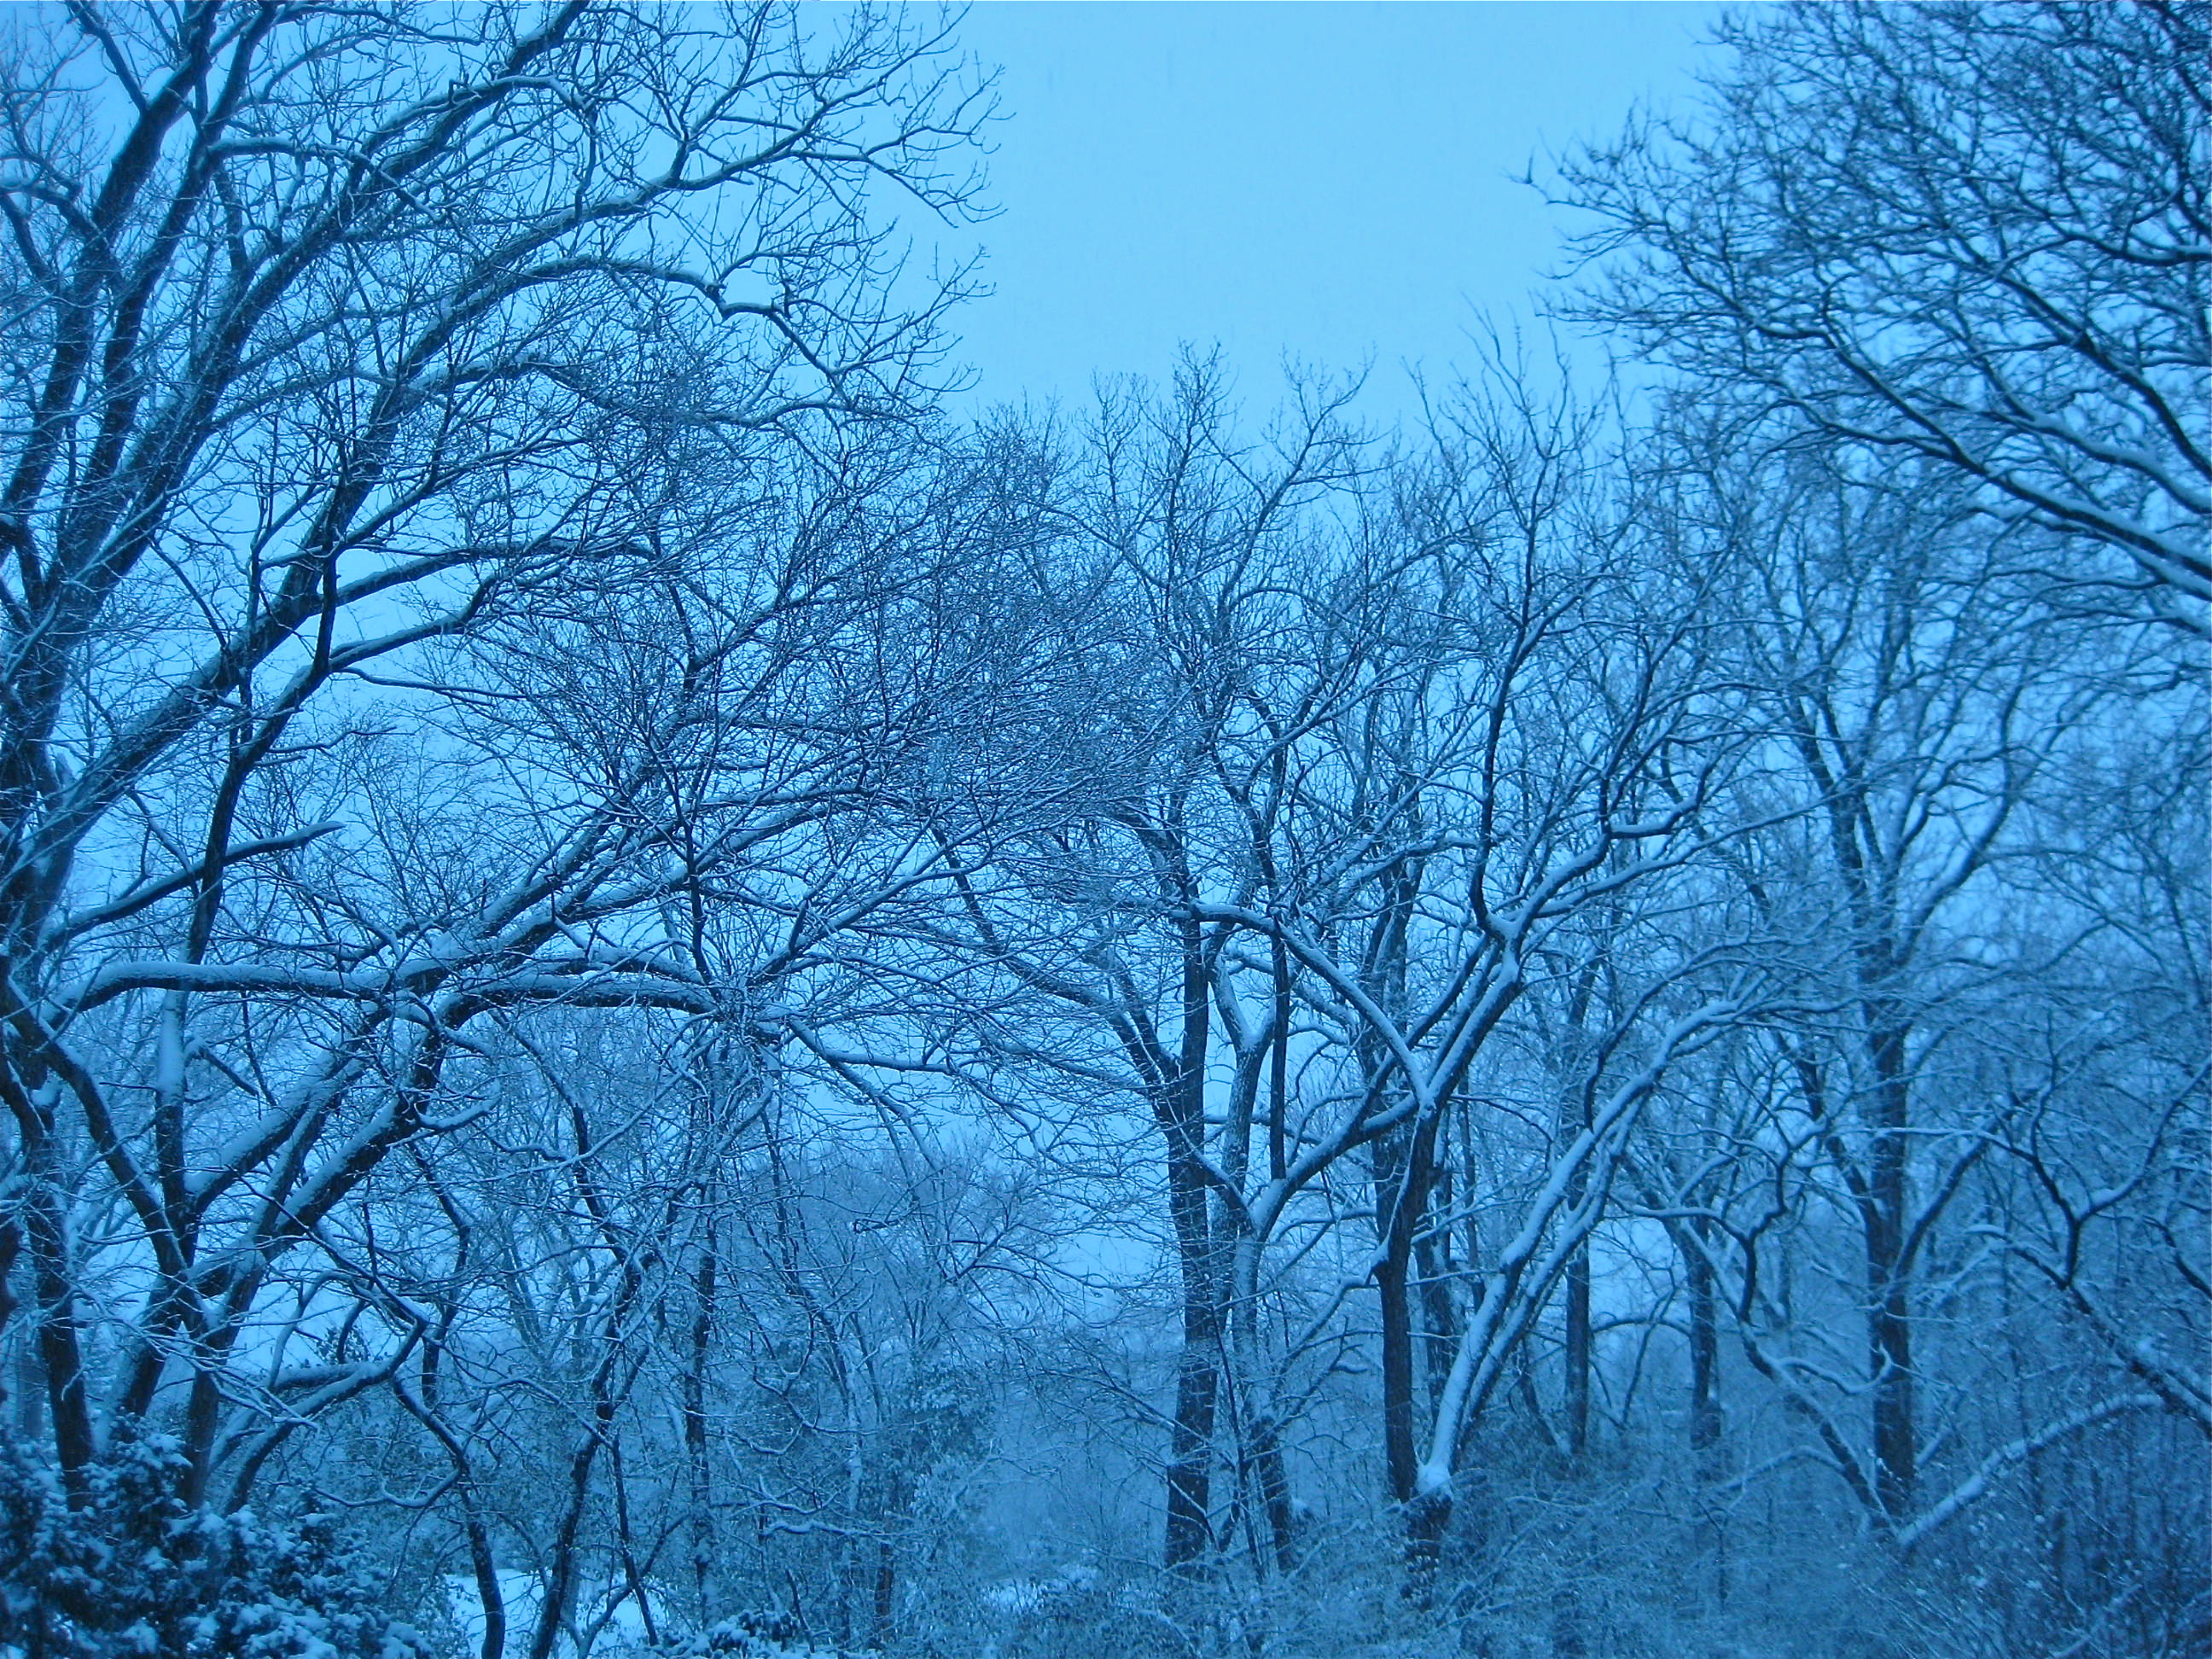 Glimpse of solace: trees in winter